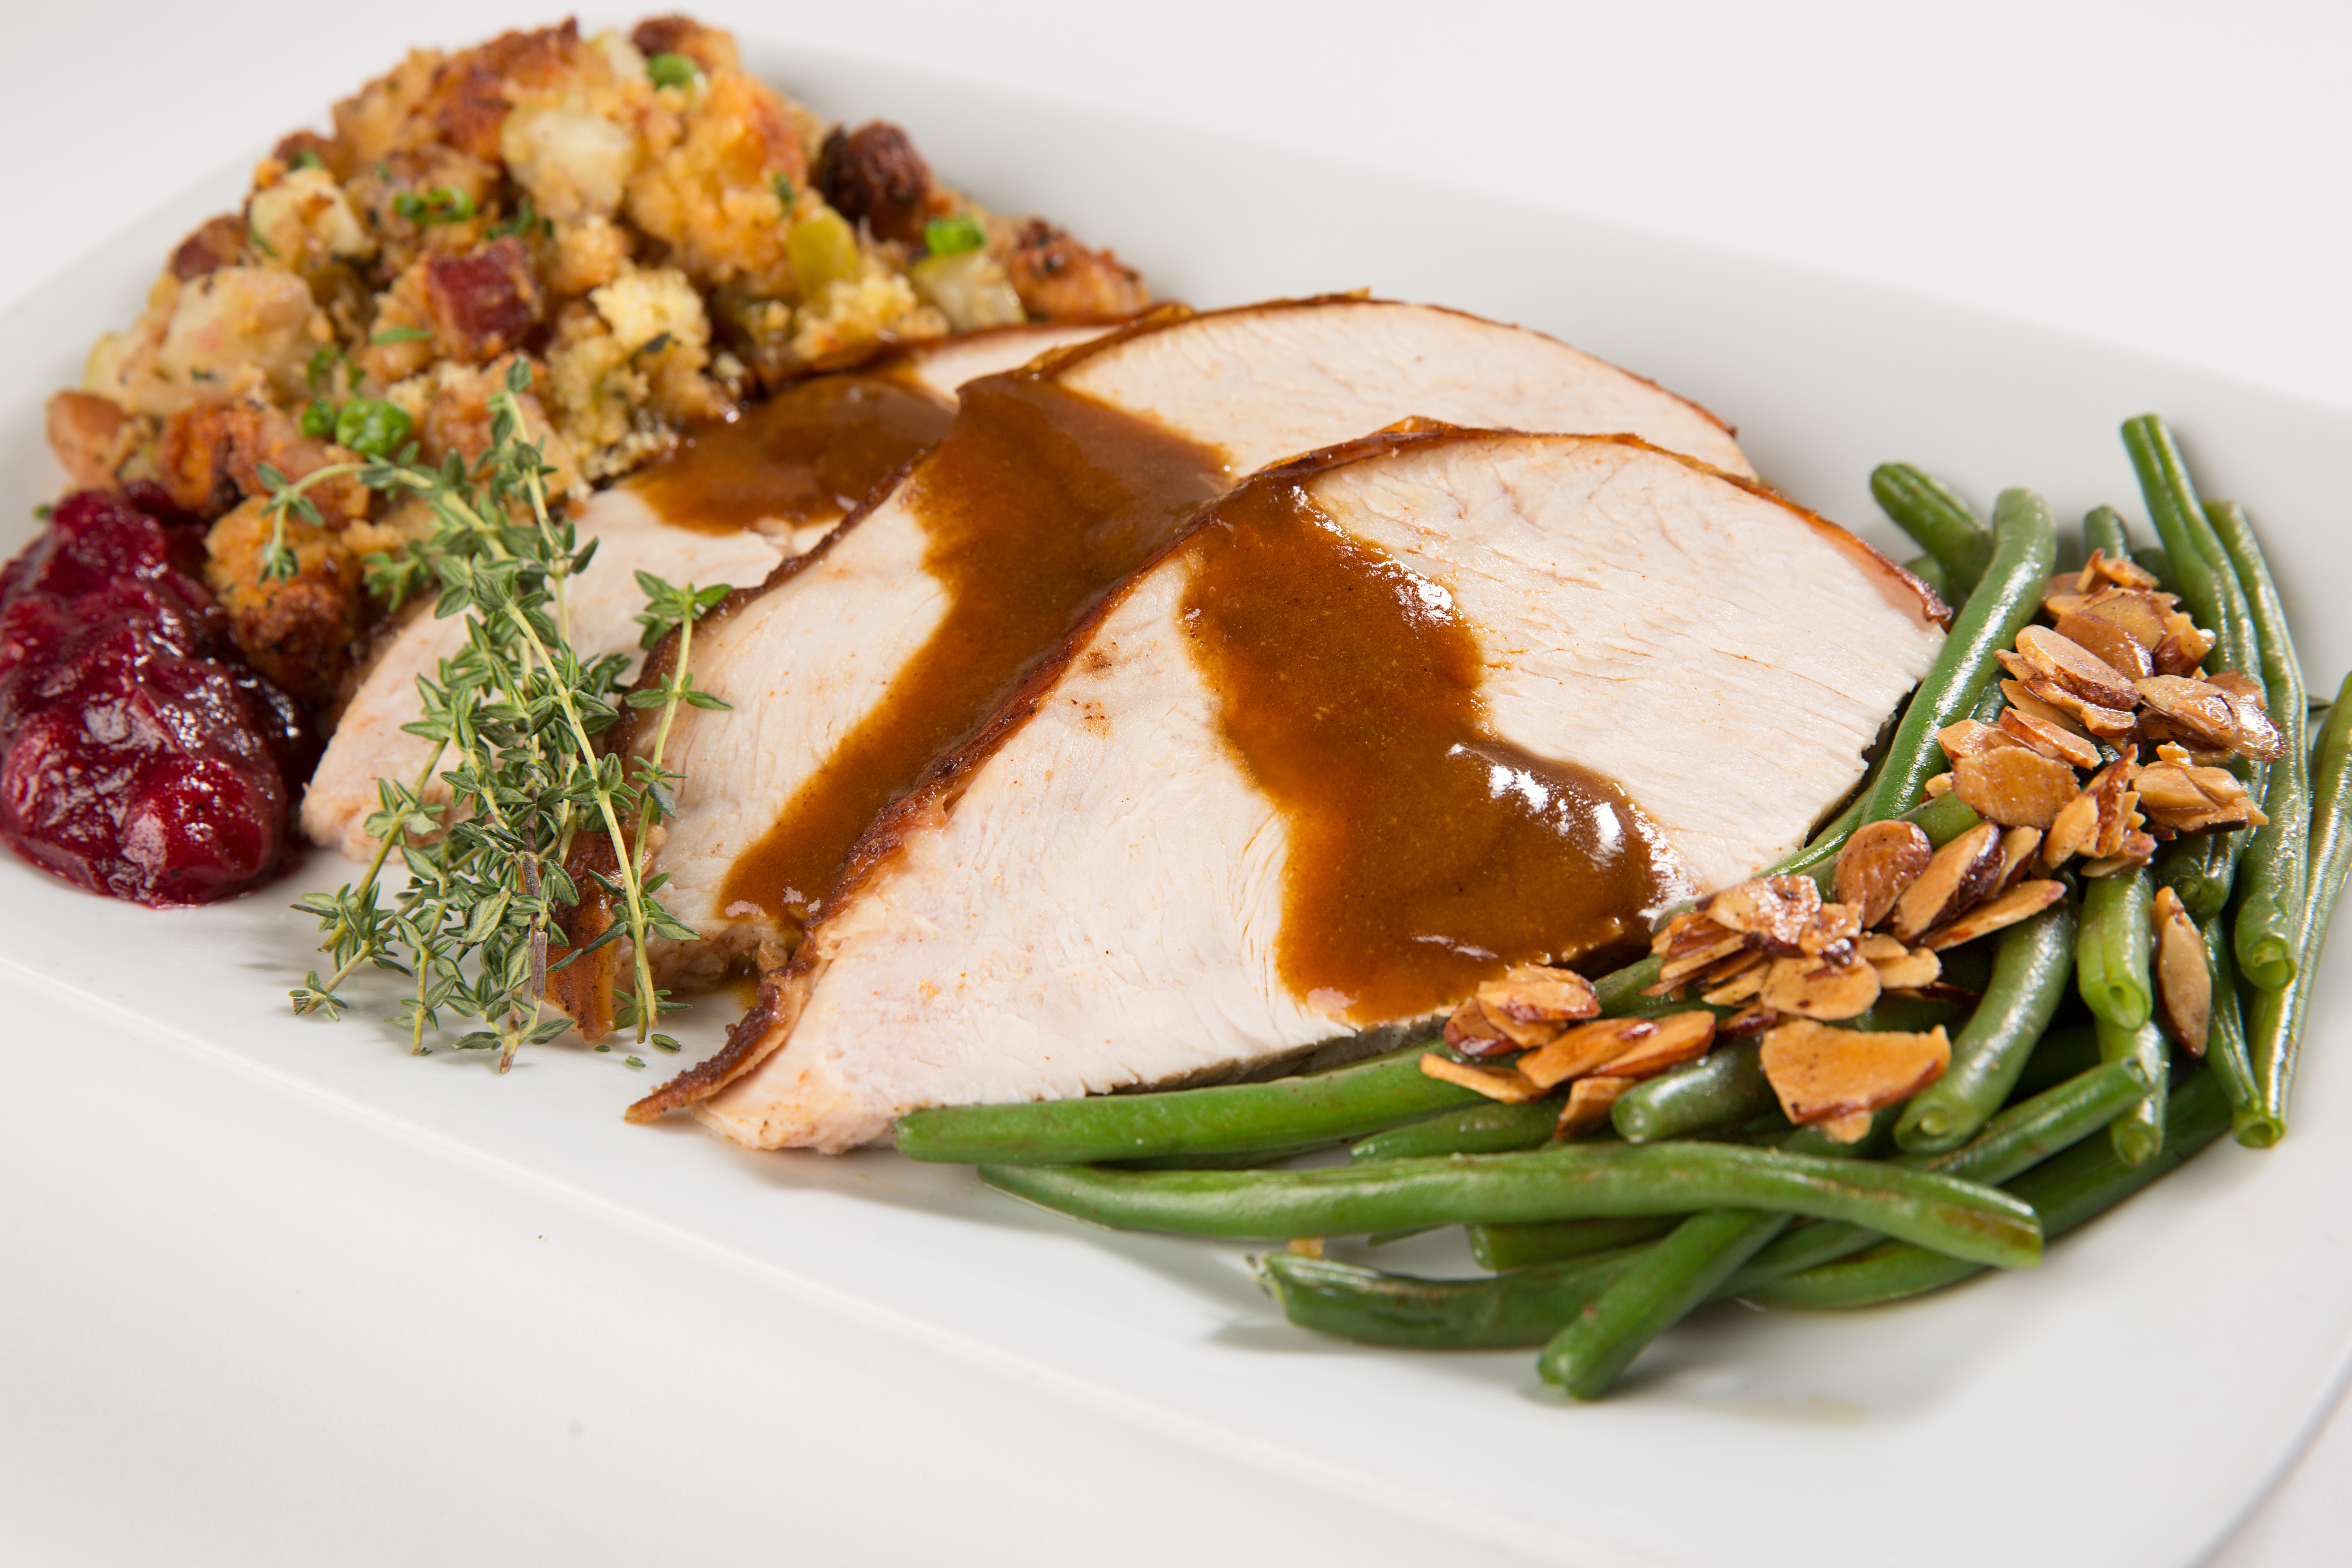 Where to Eat for Thanksgiving in Fort Worth, Texas